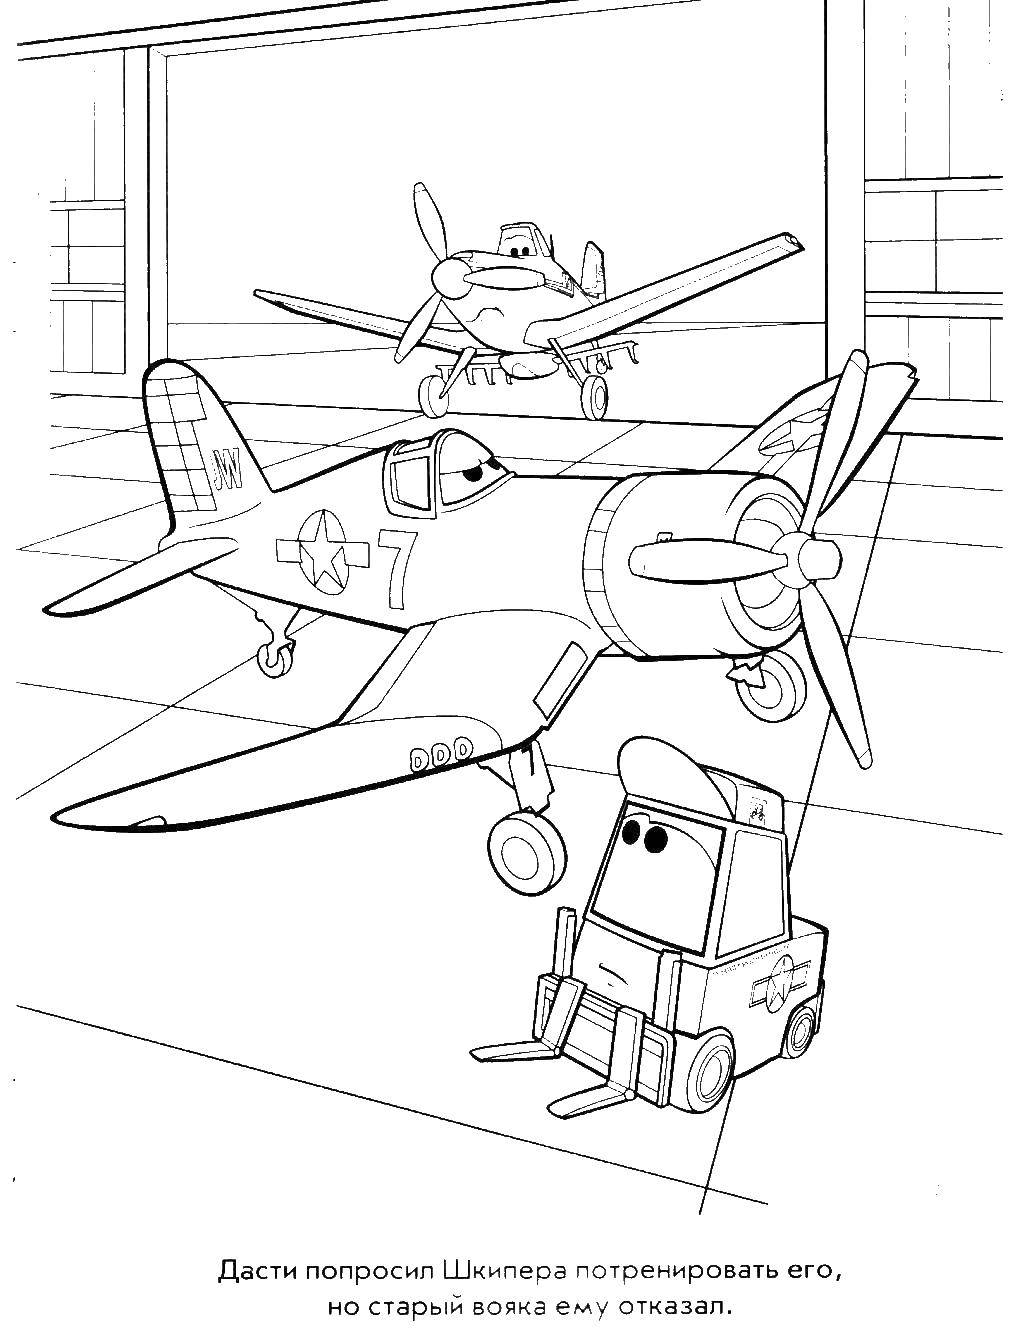 Coloring Dusty wants to train with skipper. Category coloring. Tags:  The Plane, Dusty.